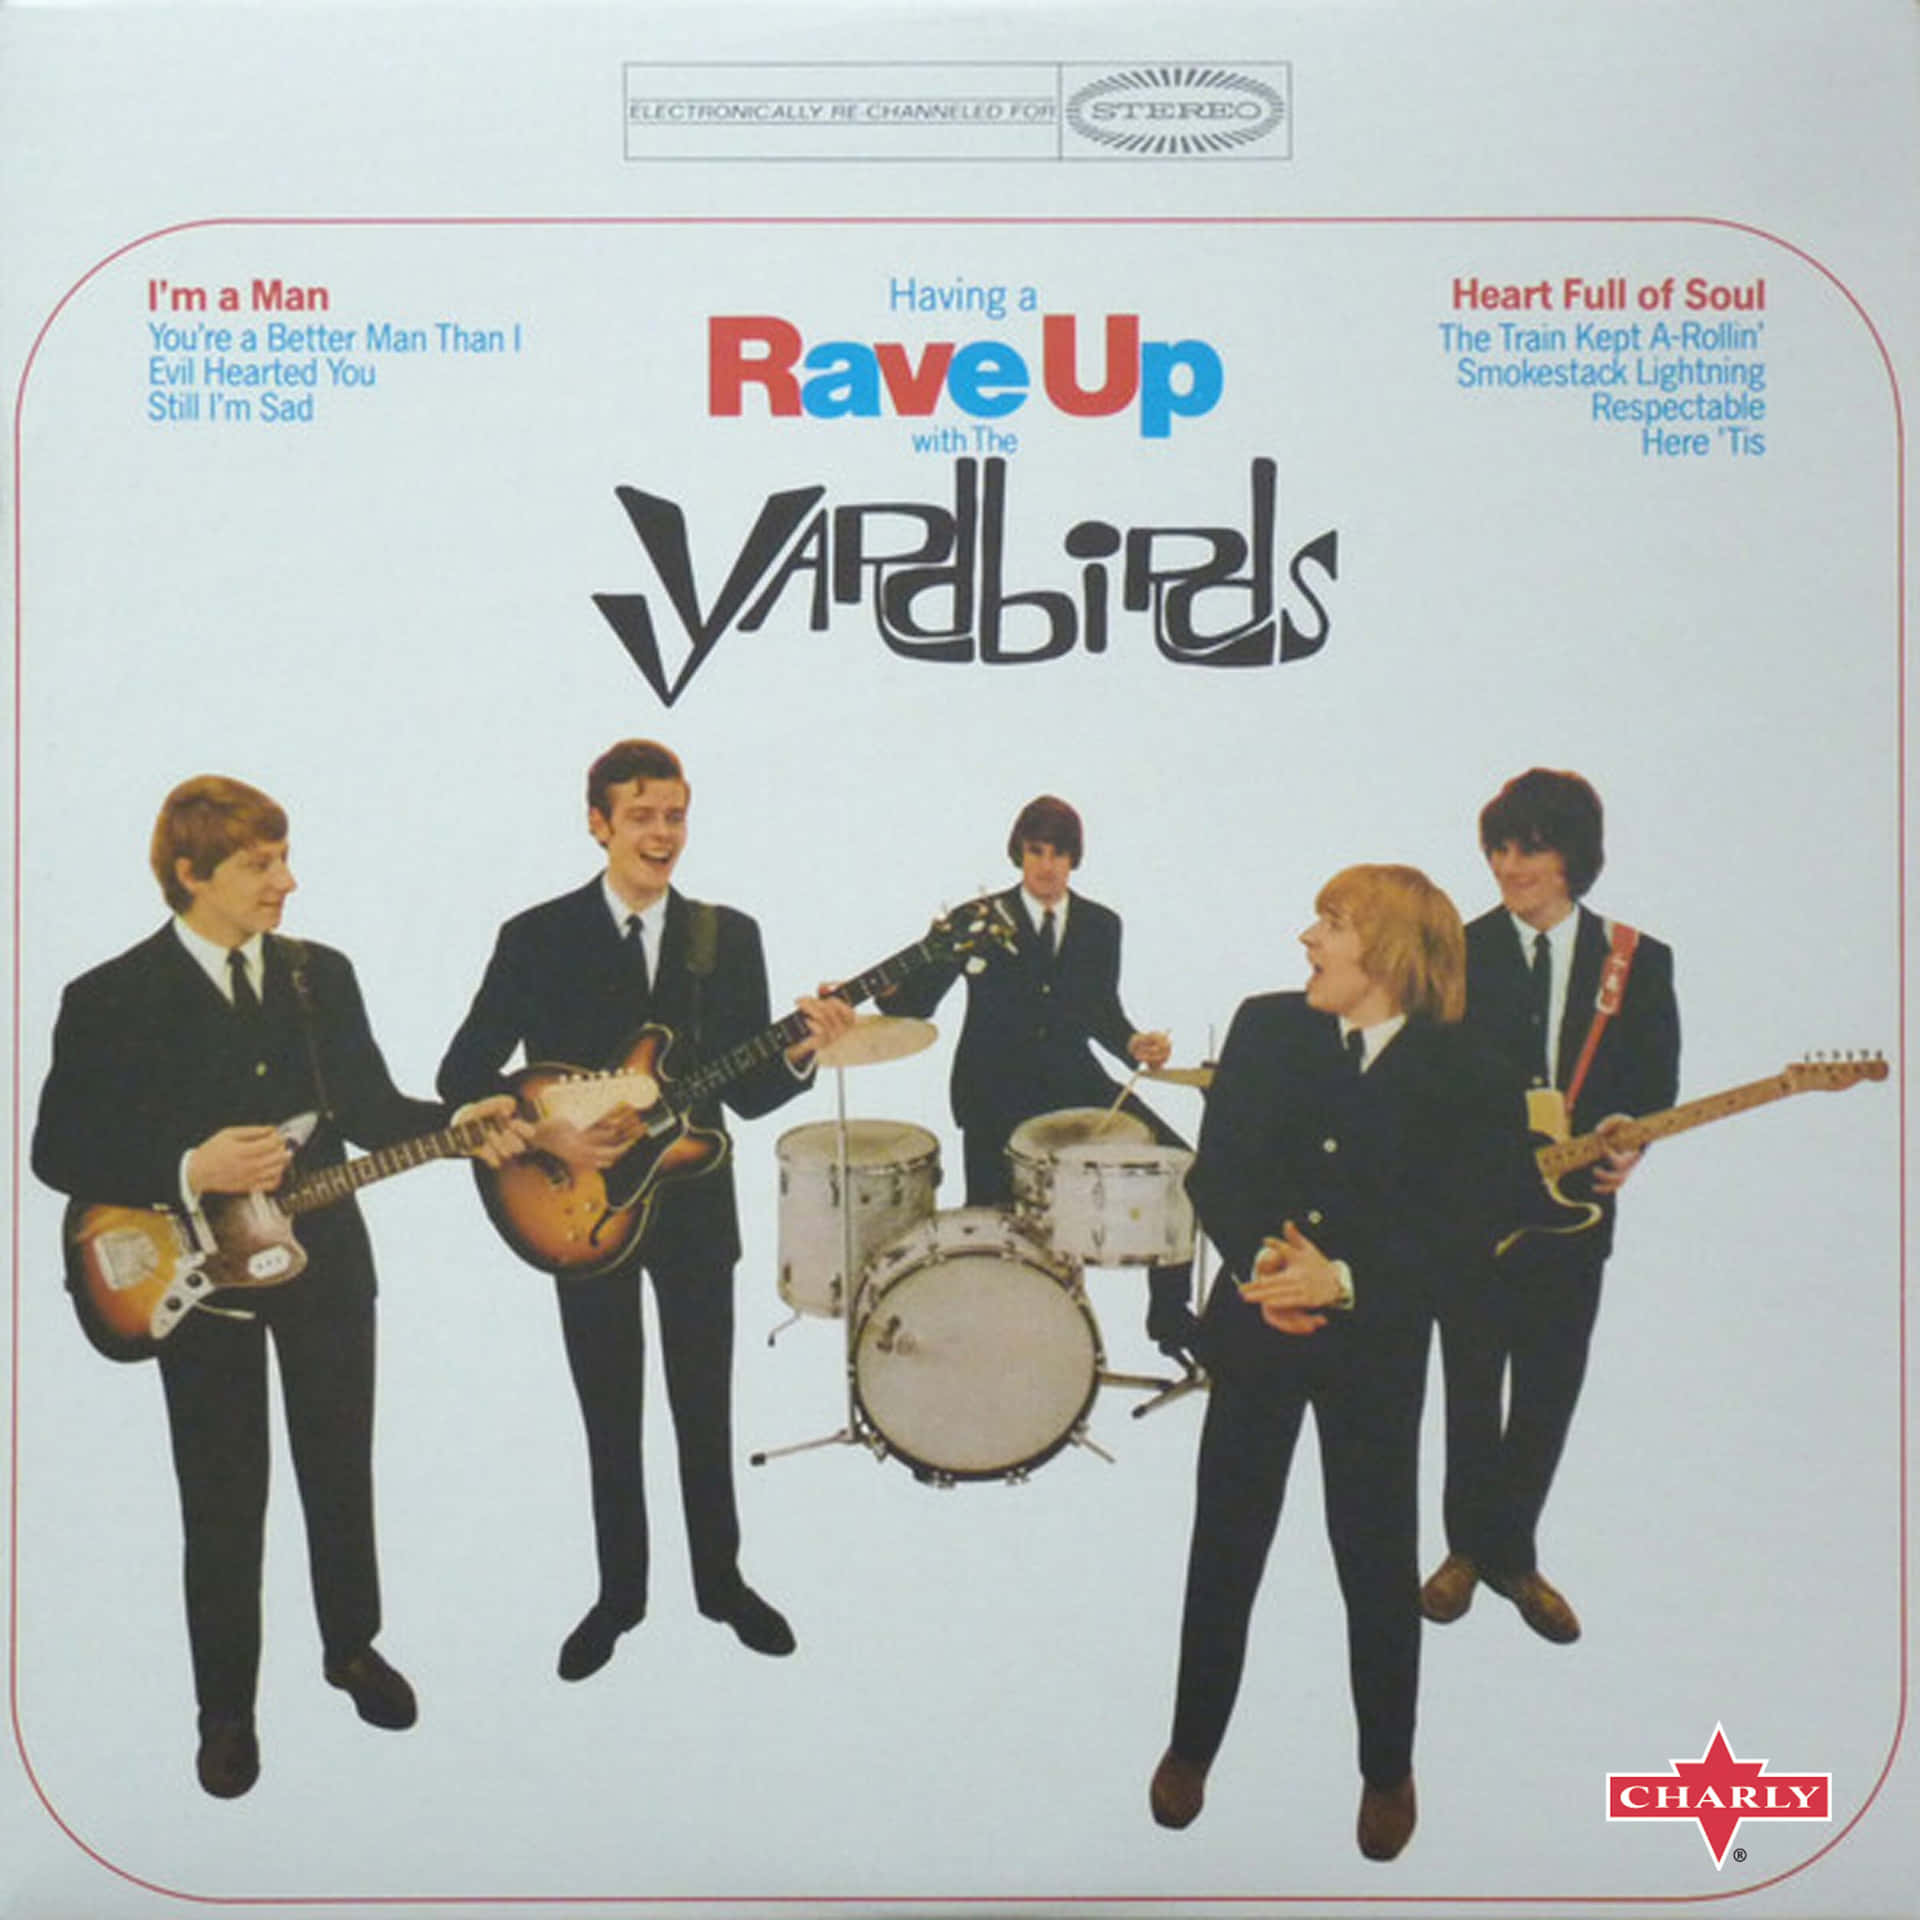 Having A Rave Up With The Yardbirds Album Cover Wallpaper